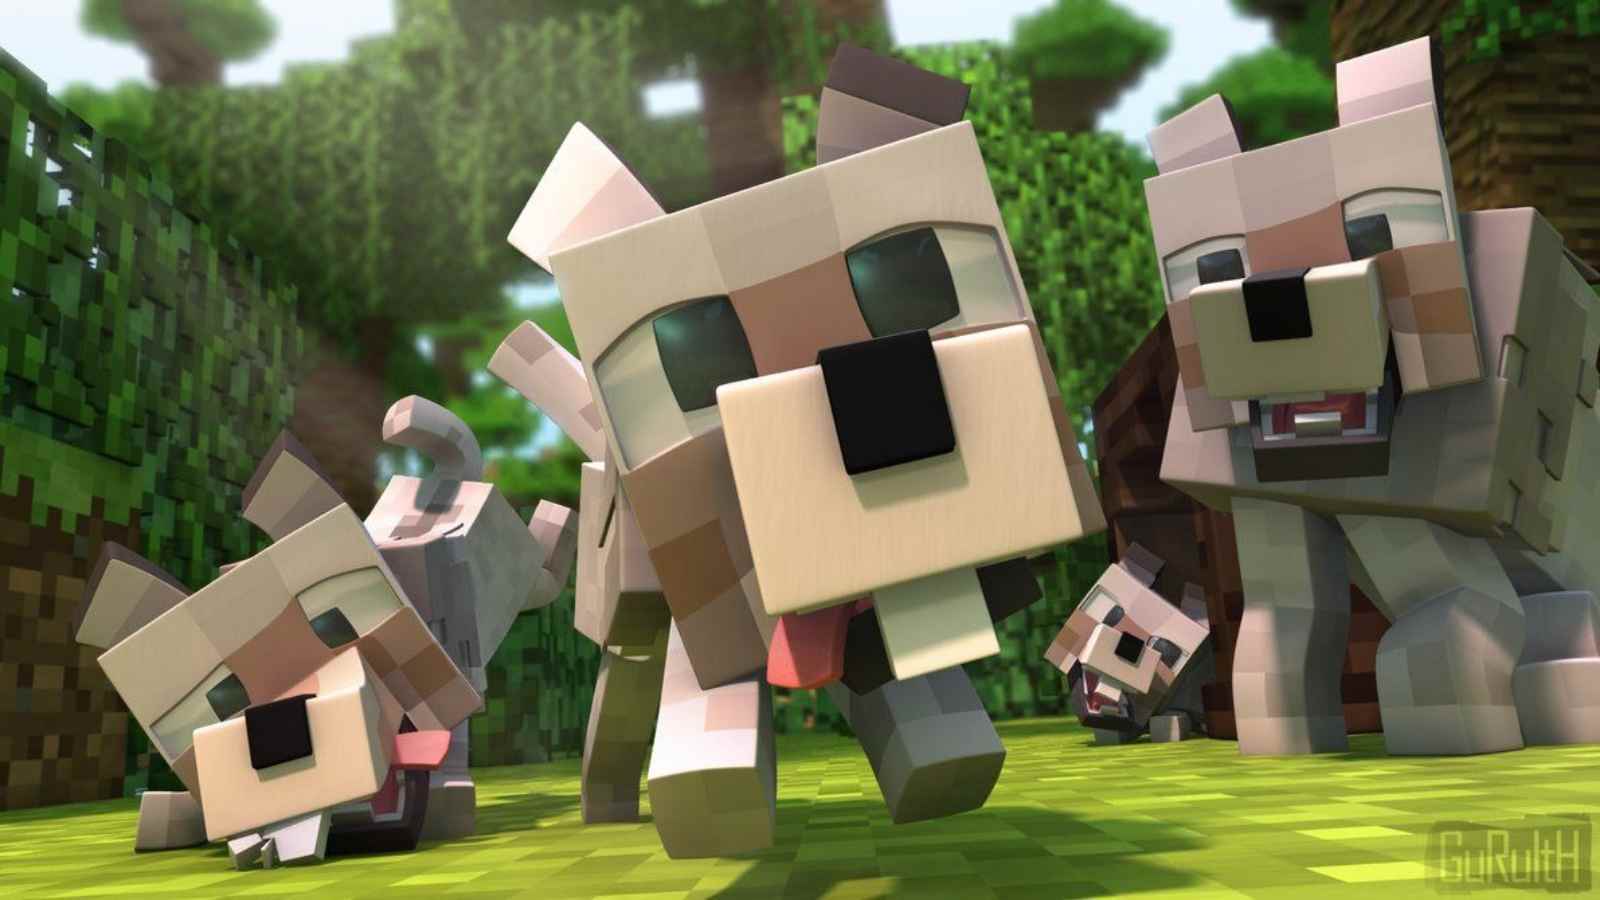 How To Make Dogs In Minecraft